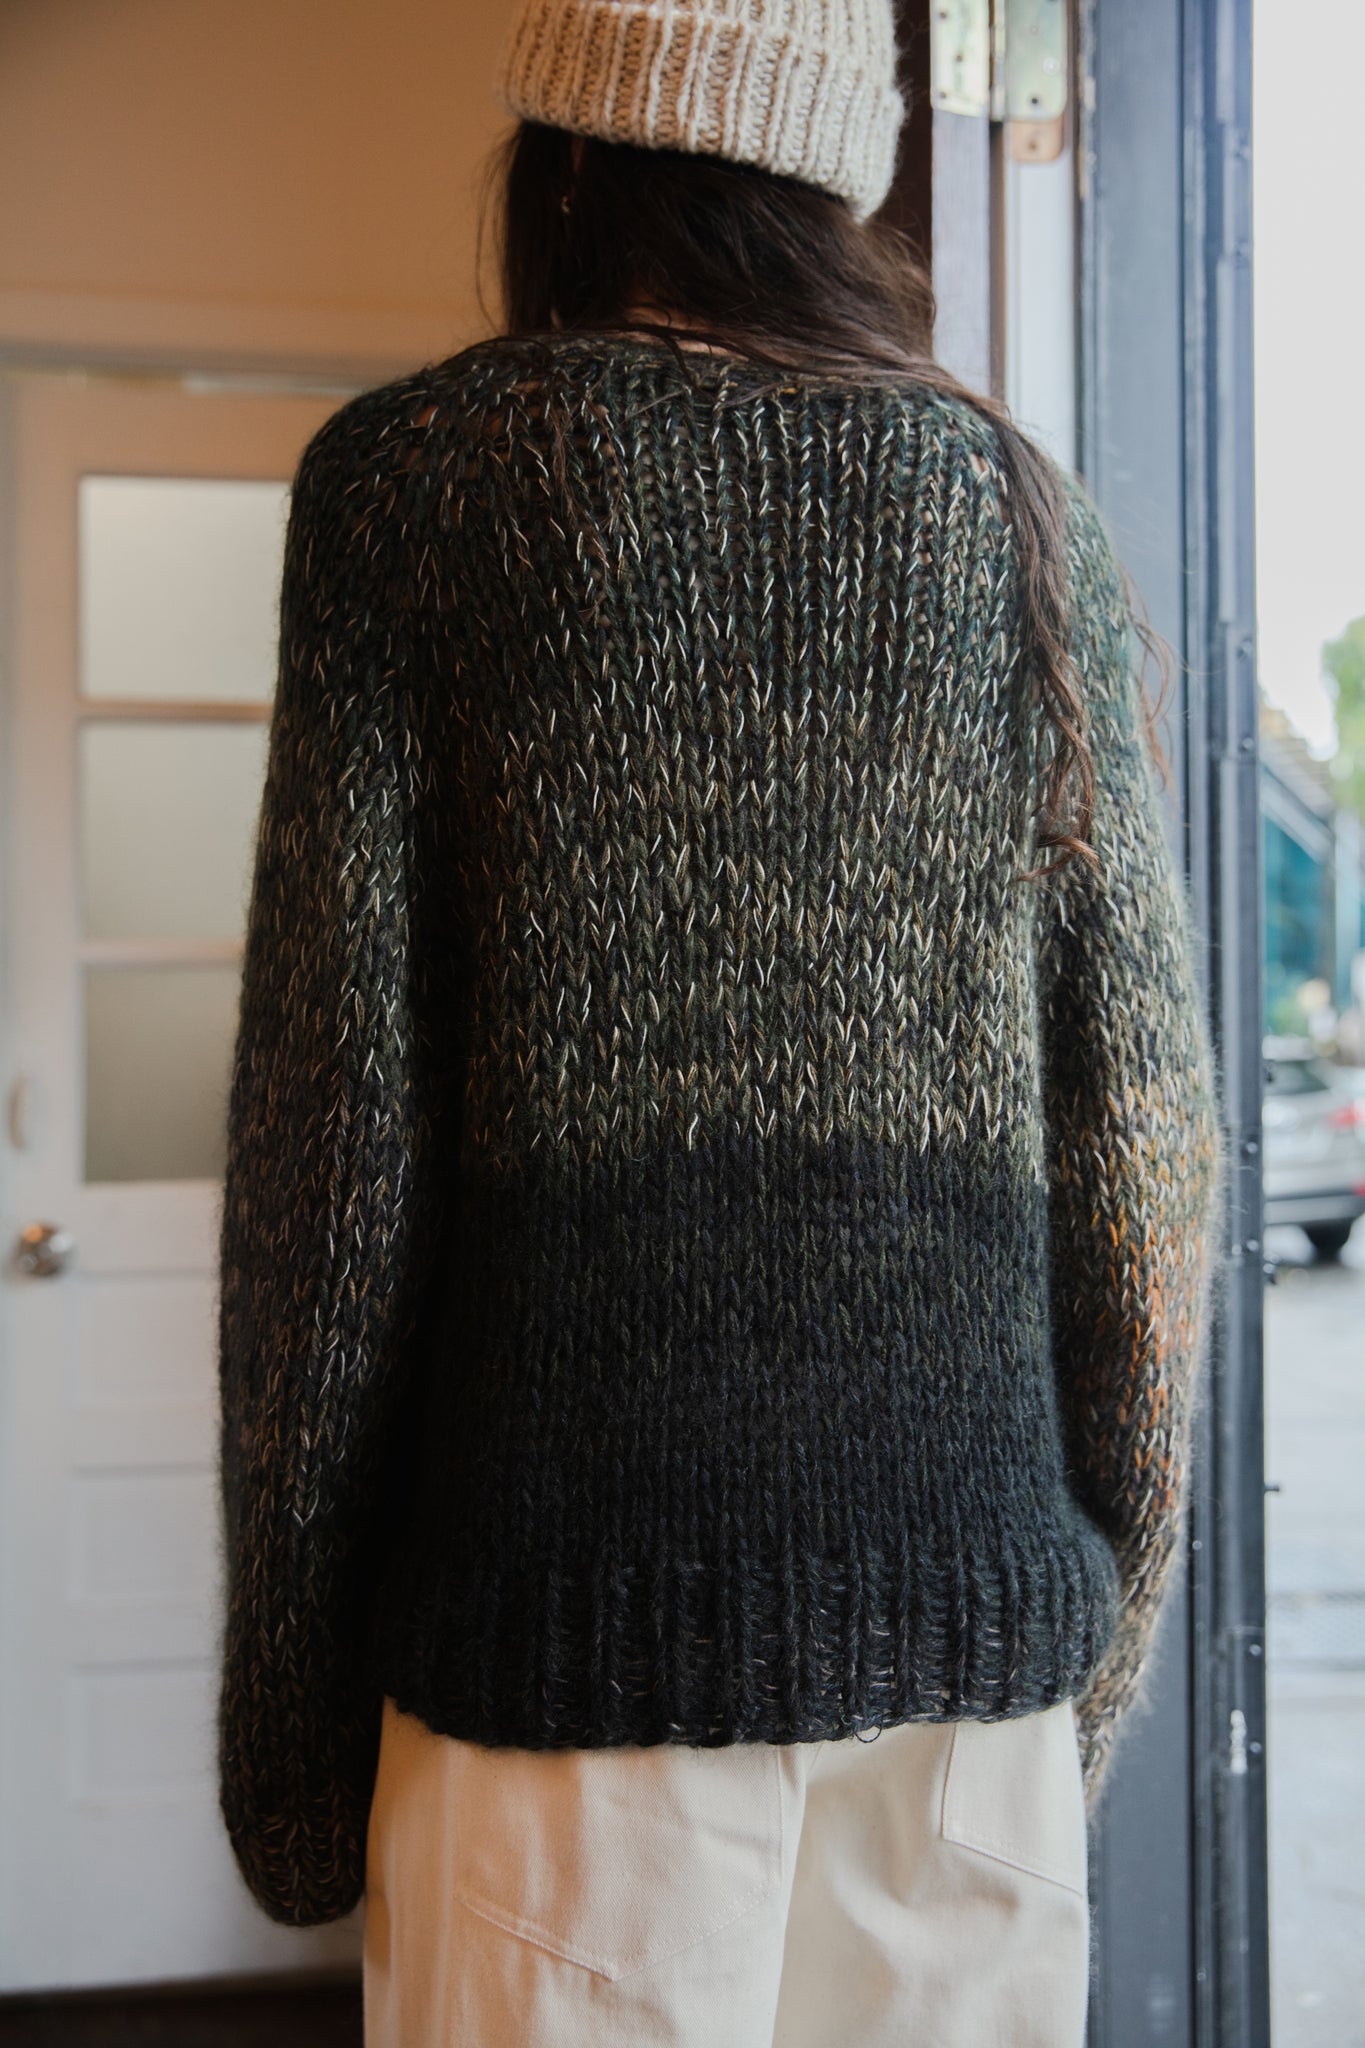 dark green and black colorblock hand knit sweater